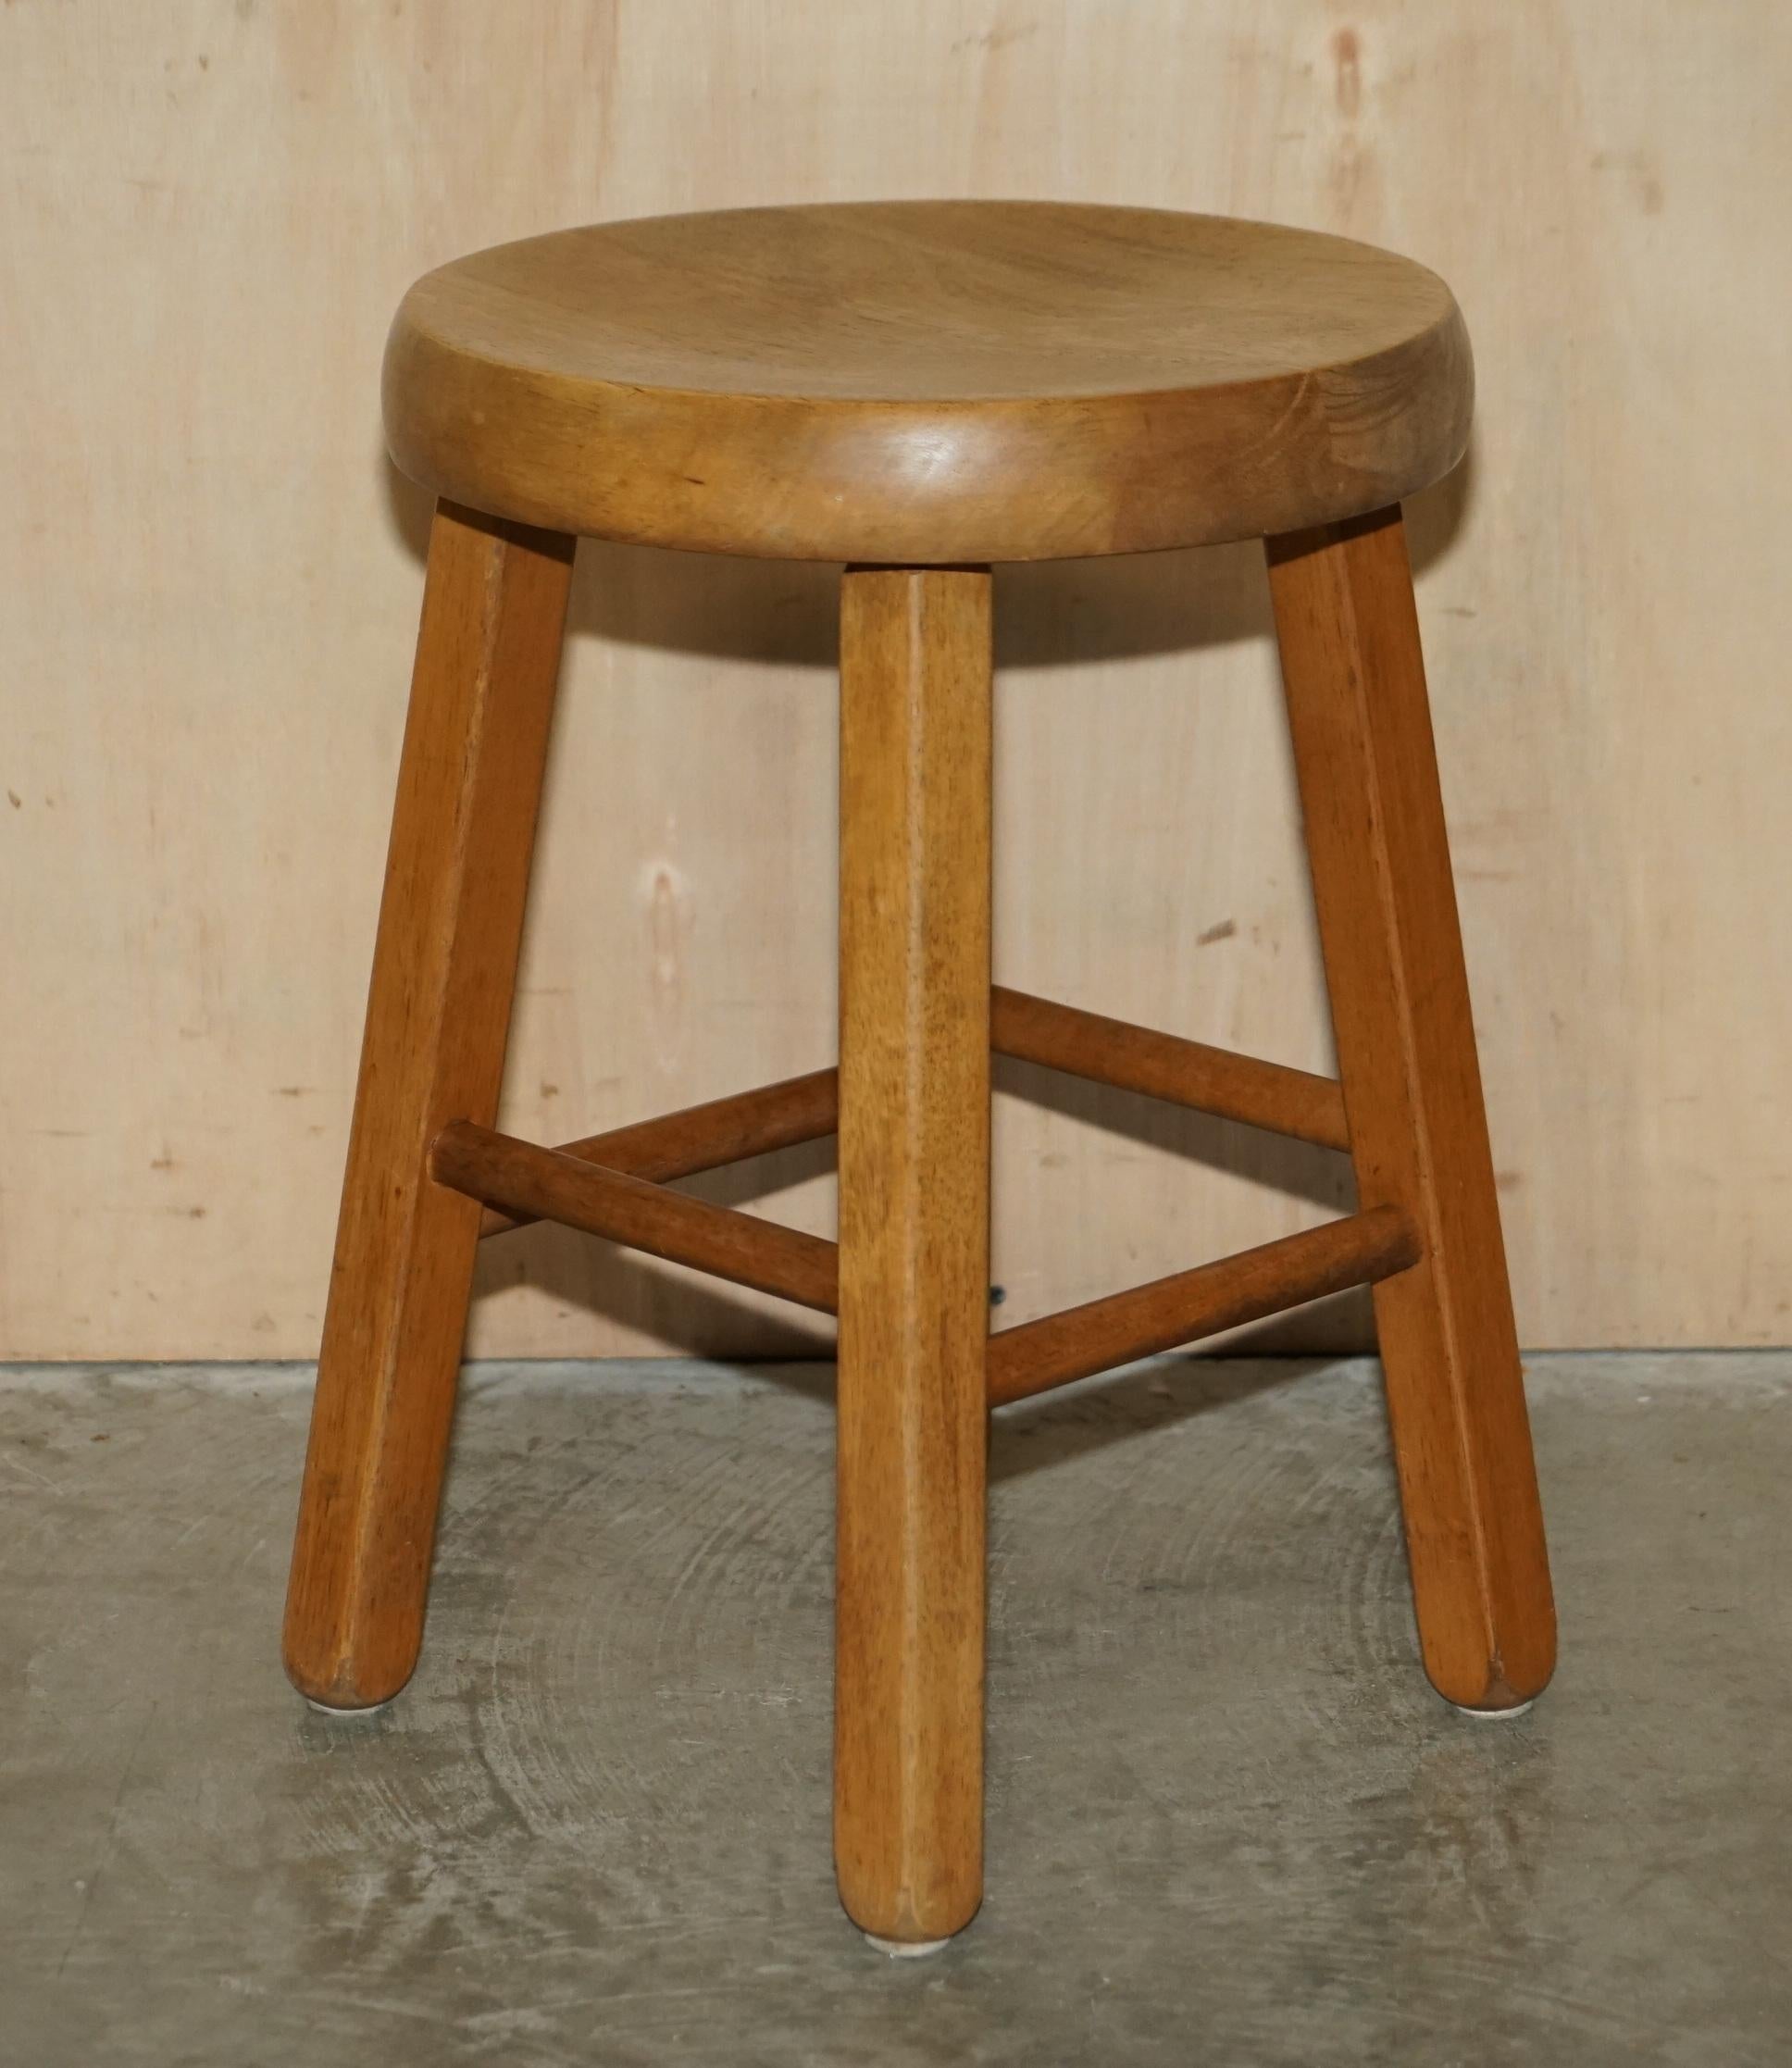 We are delighted to offer for sale this lovely suite of four original hand made in England solid oak dining room table stools

A very nice suite indeed, they are a good size and work brilliantly for compact living 

Condition wise, we have